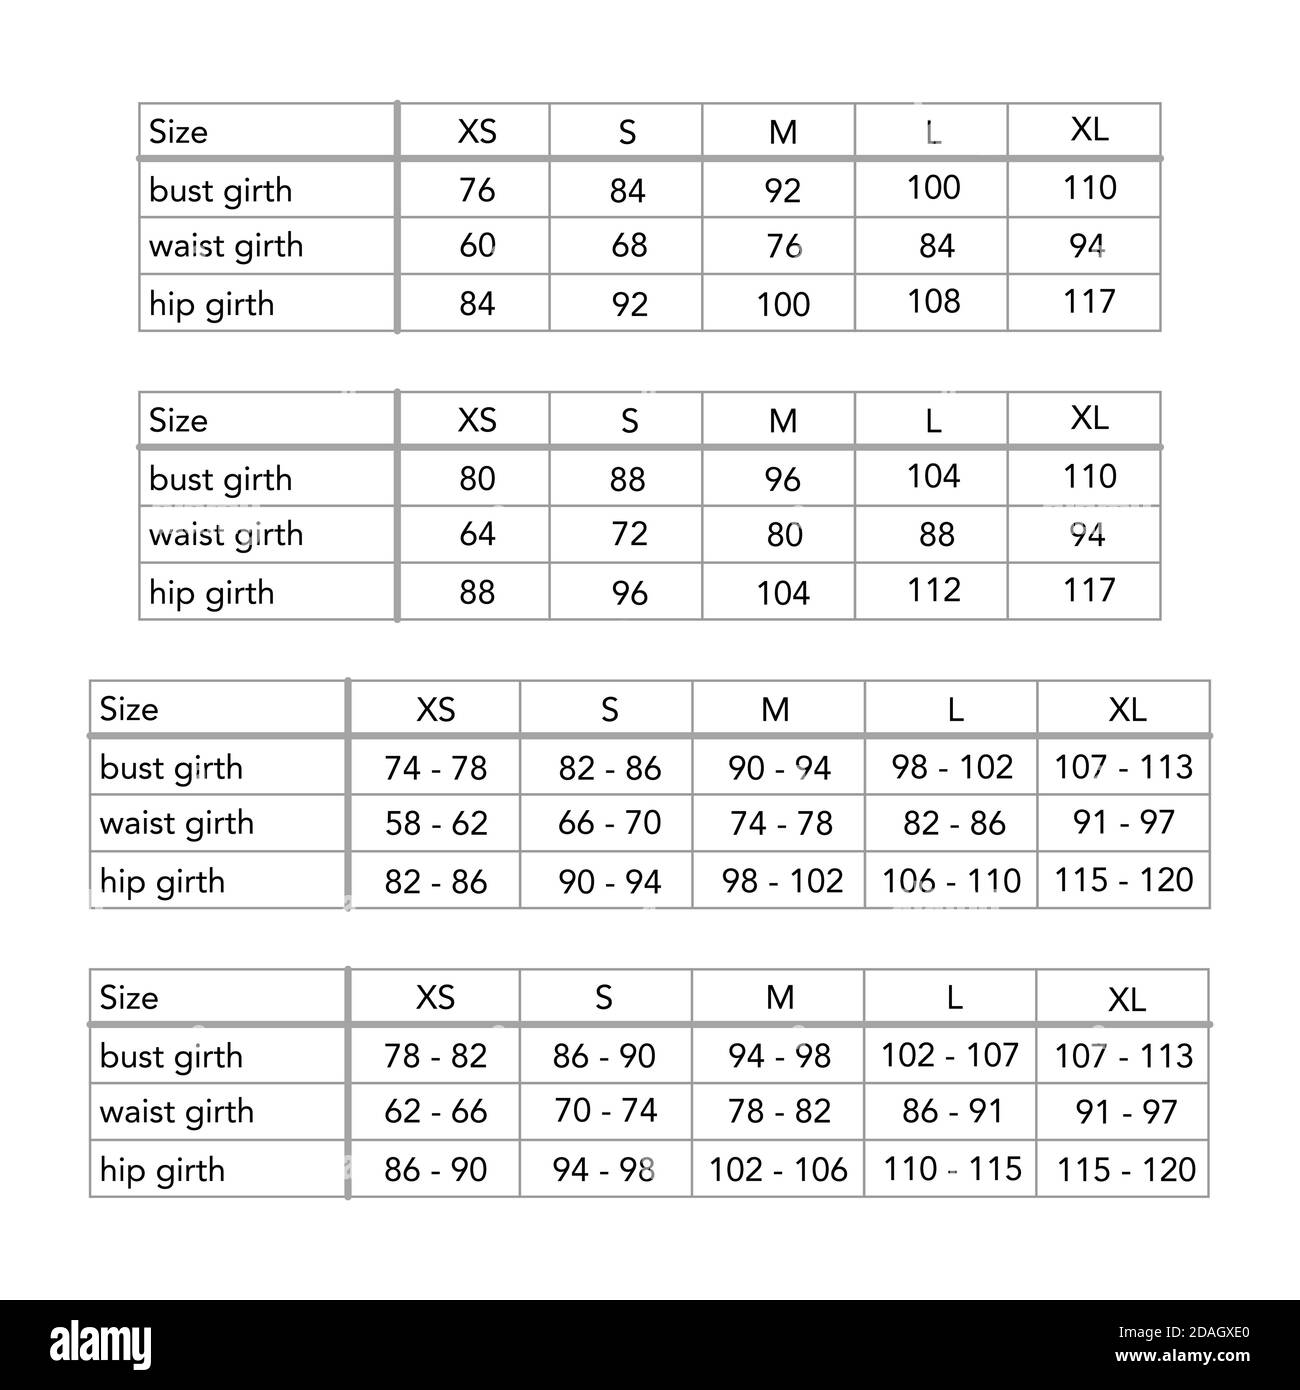 Men new European system clothing standard body measurements for different  brands, style fashion male size chart for site, production and online  clothes shop. XS, S, M, L, XL, bust, waist, hip girth